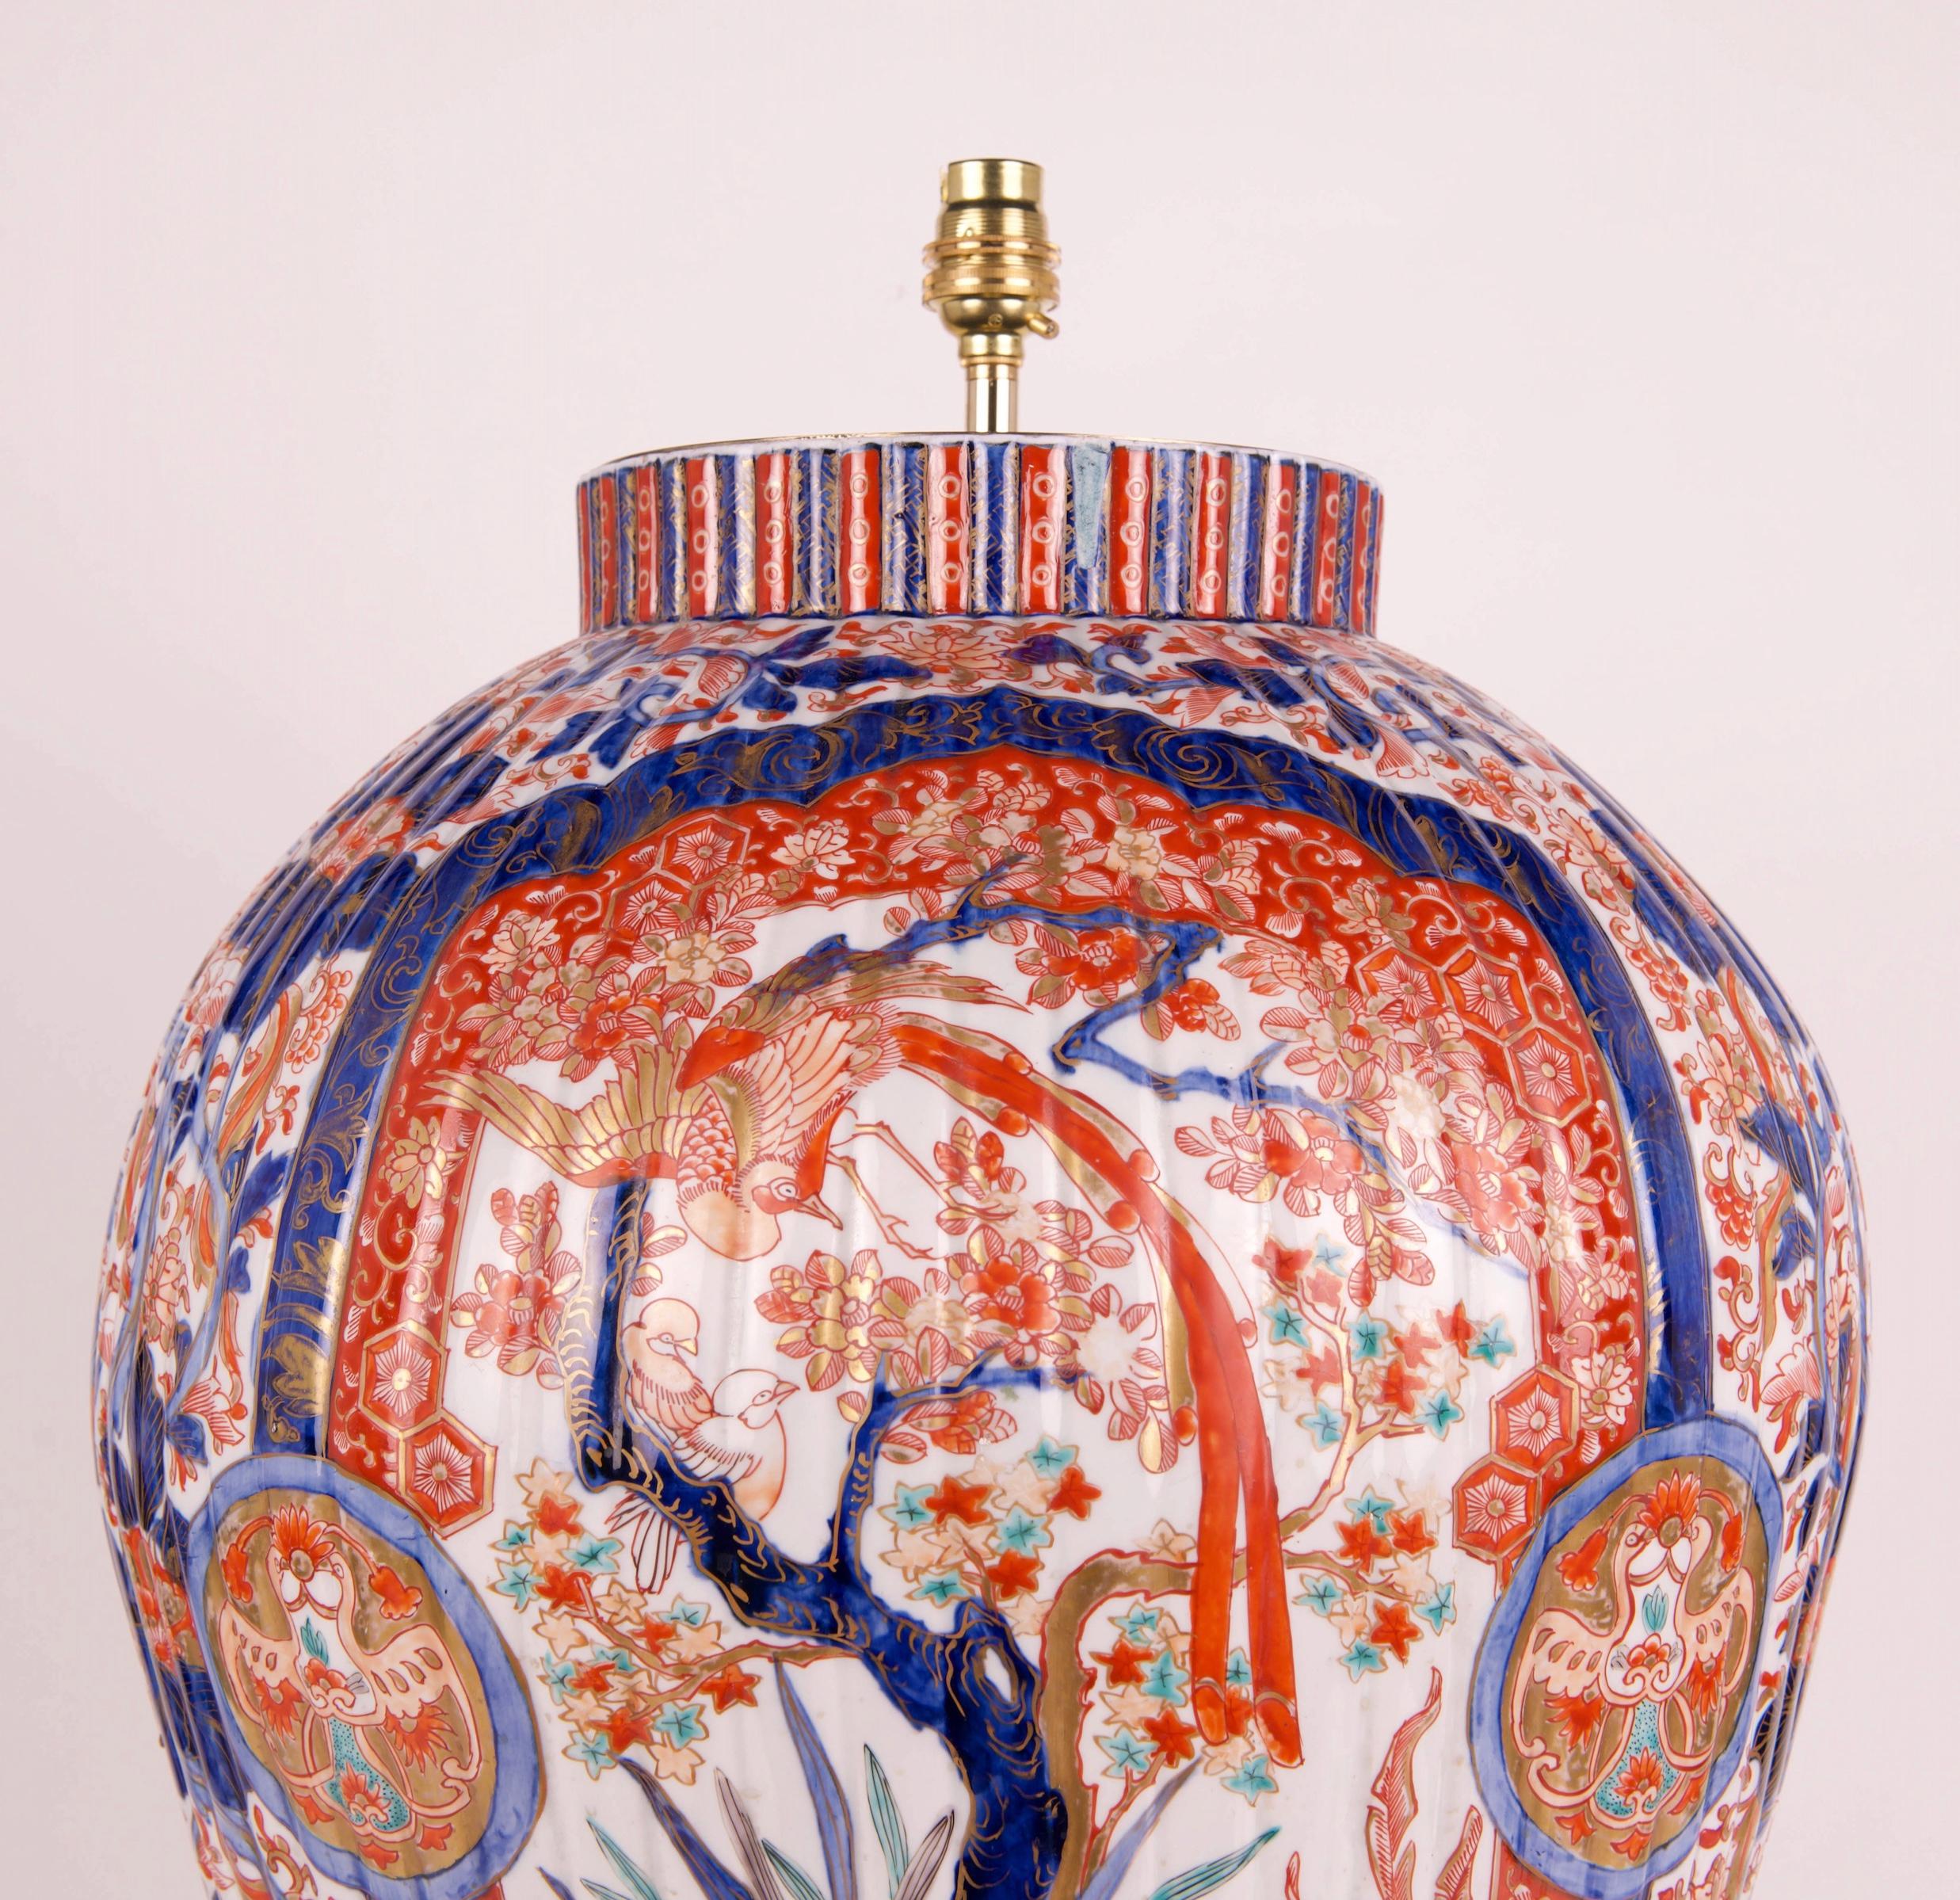 A wonderful very large 19th century Japanese Imari vase, with ribbed body form, decorated throughout in the typical Imari palette of iron reds and blues with gilded highlights on a white background, with two large panels depicting wonderful garden